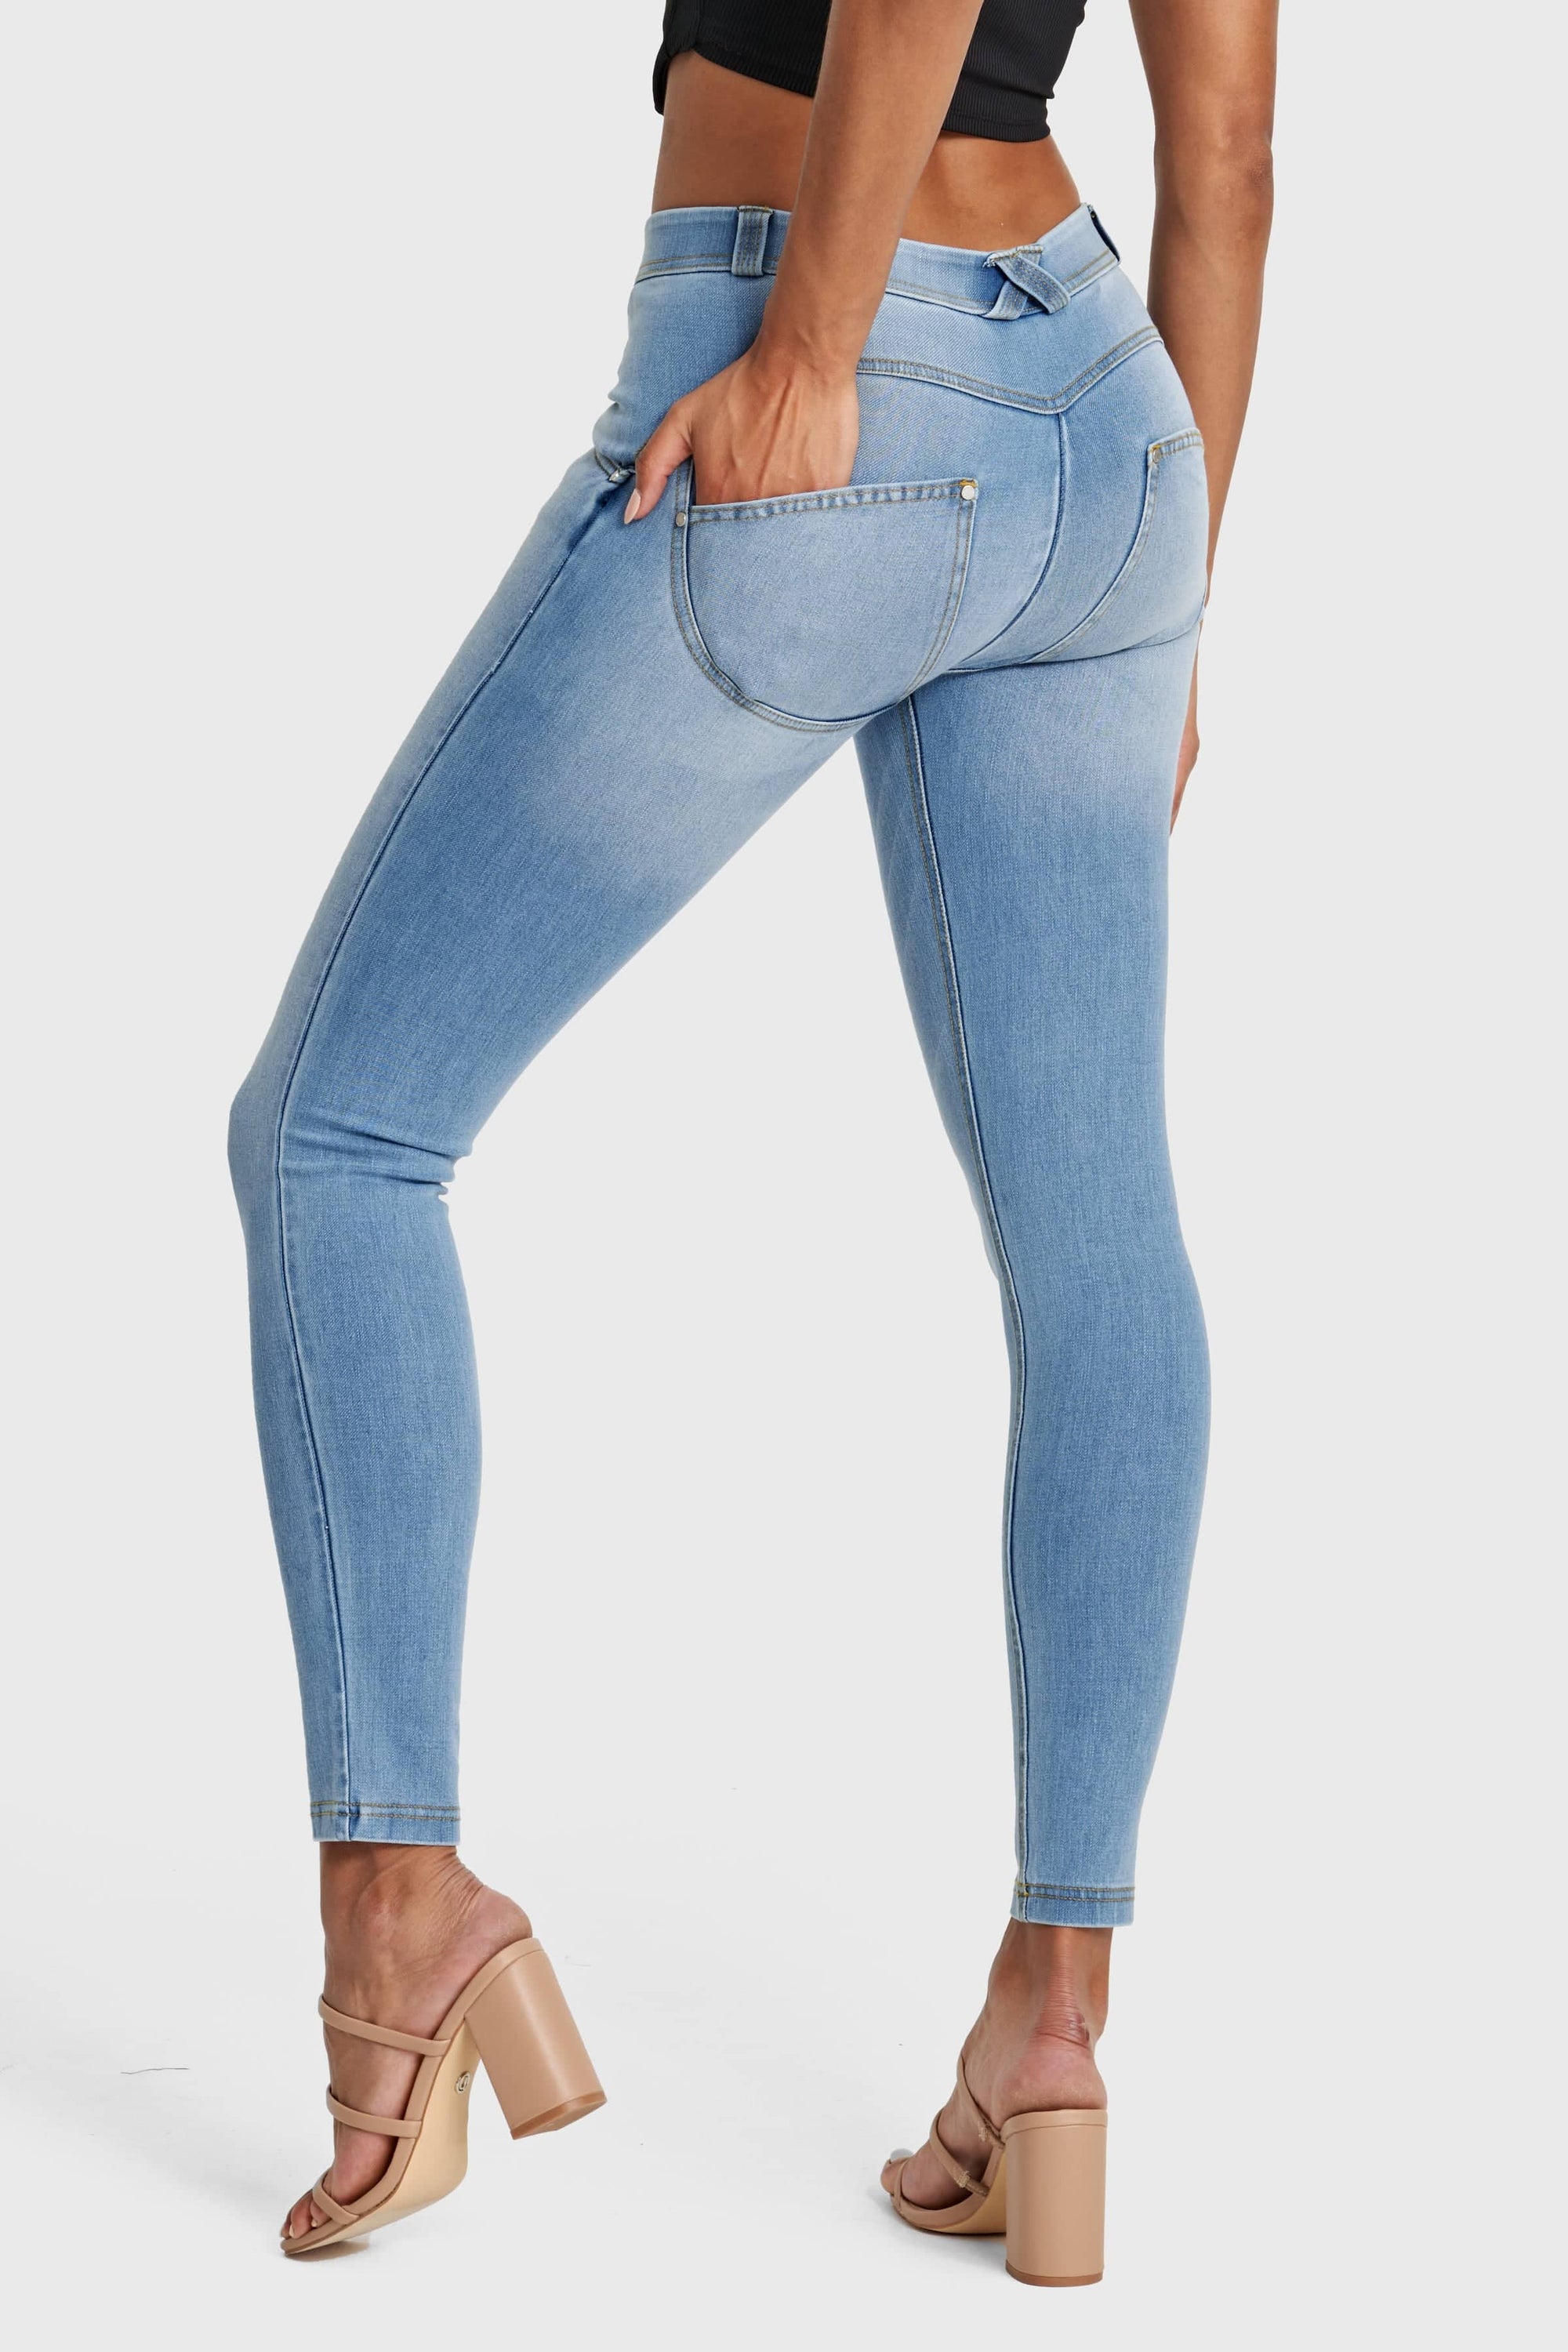 WR.UP® Snug Jeans - Mid Rise - Full Length - Light Blue + Yellow Stitching 13